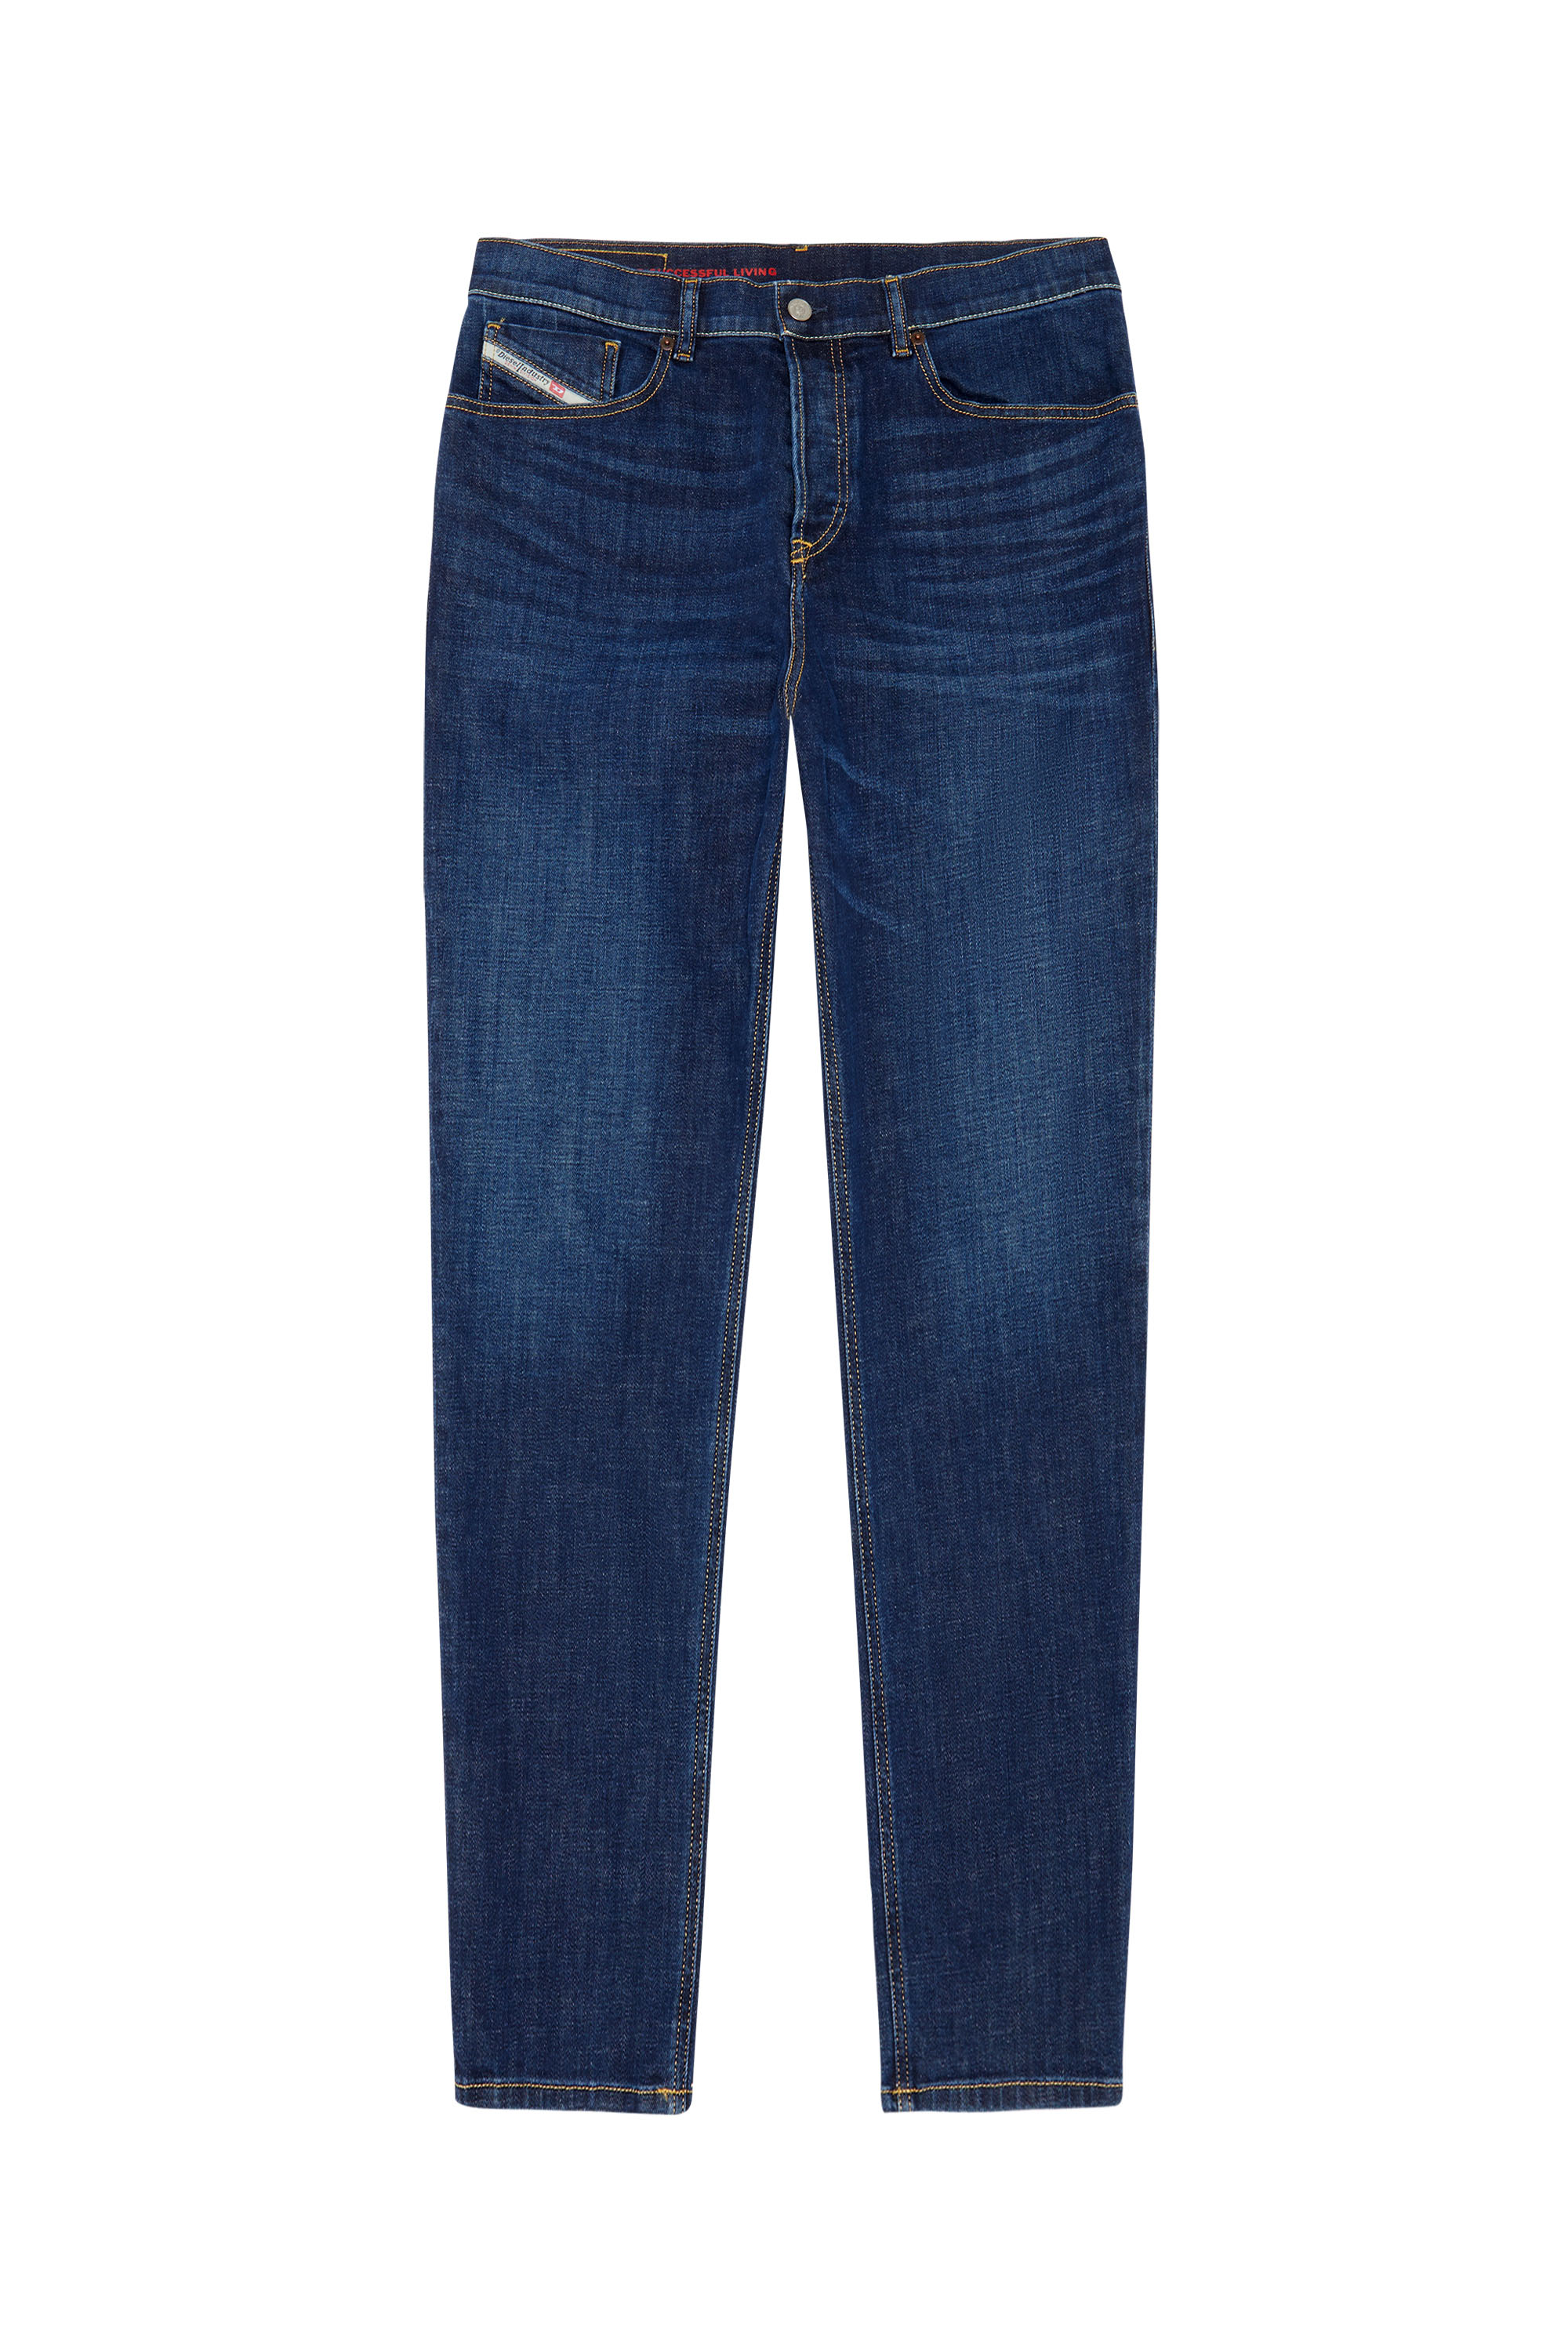 2005 D-FINING 09B90 Tapered Jeans, Dark Blue - Jeans